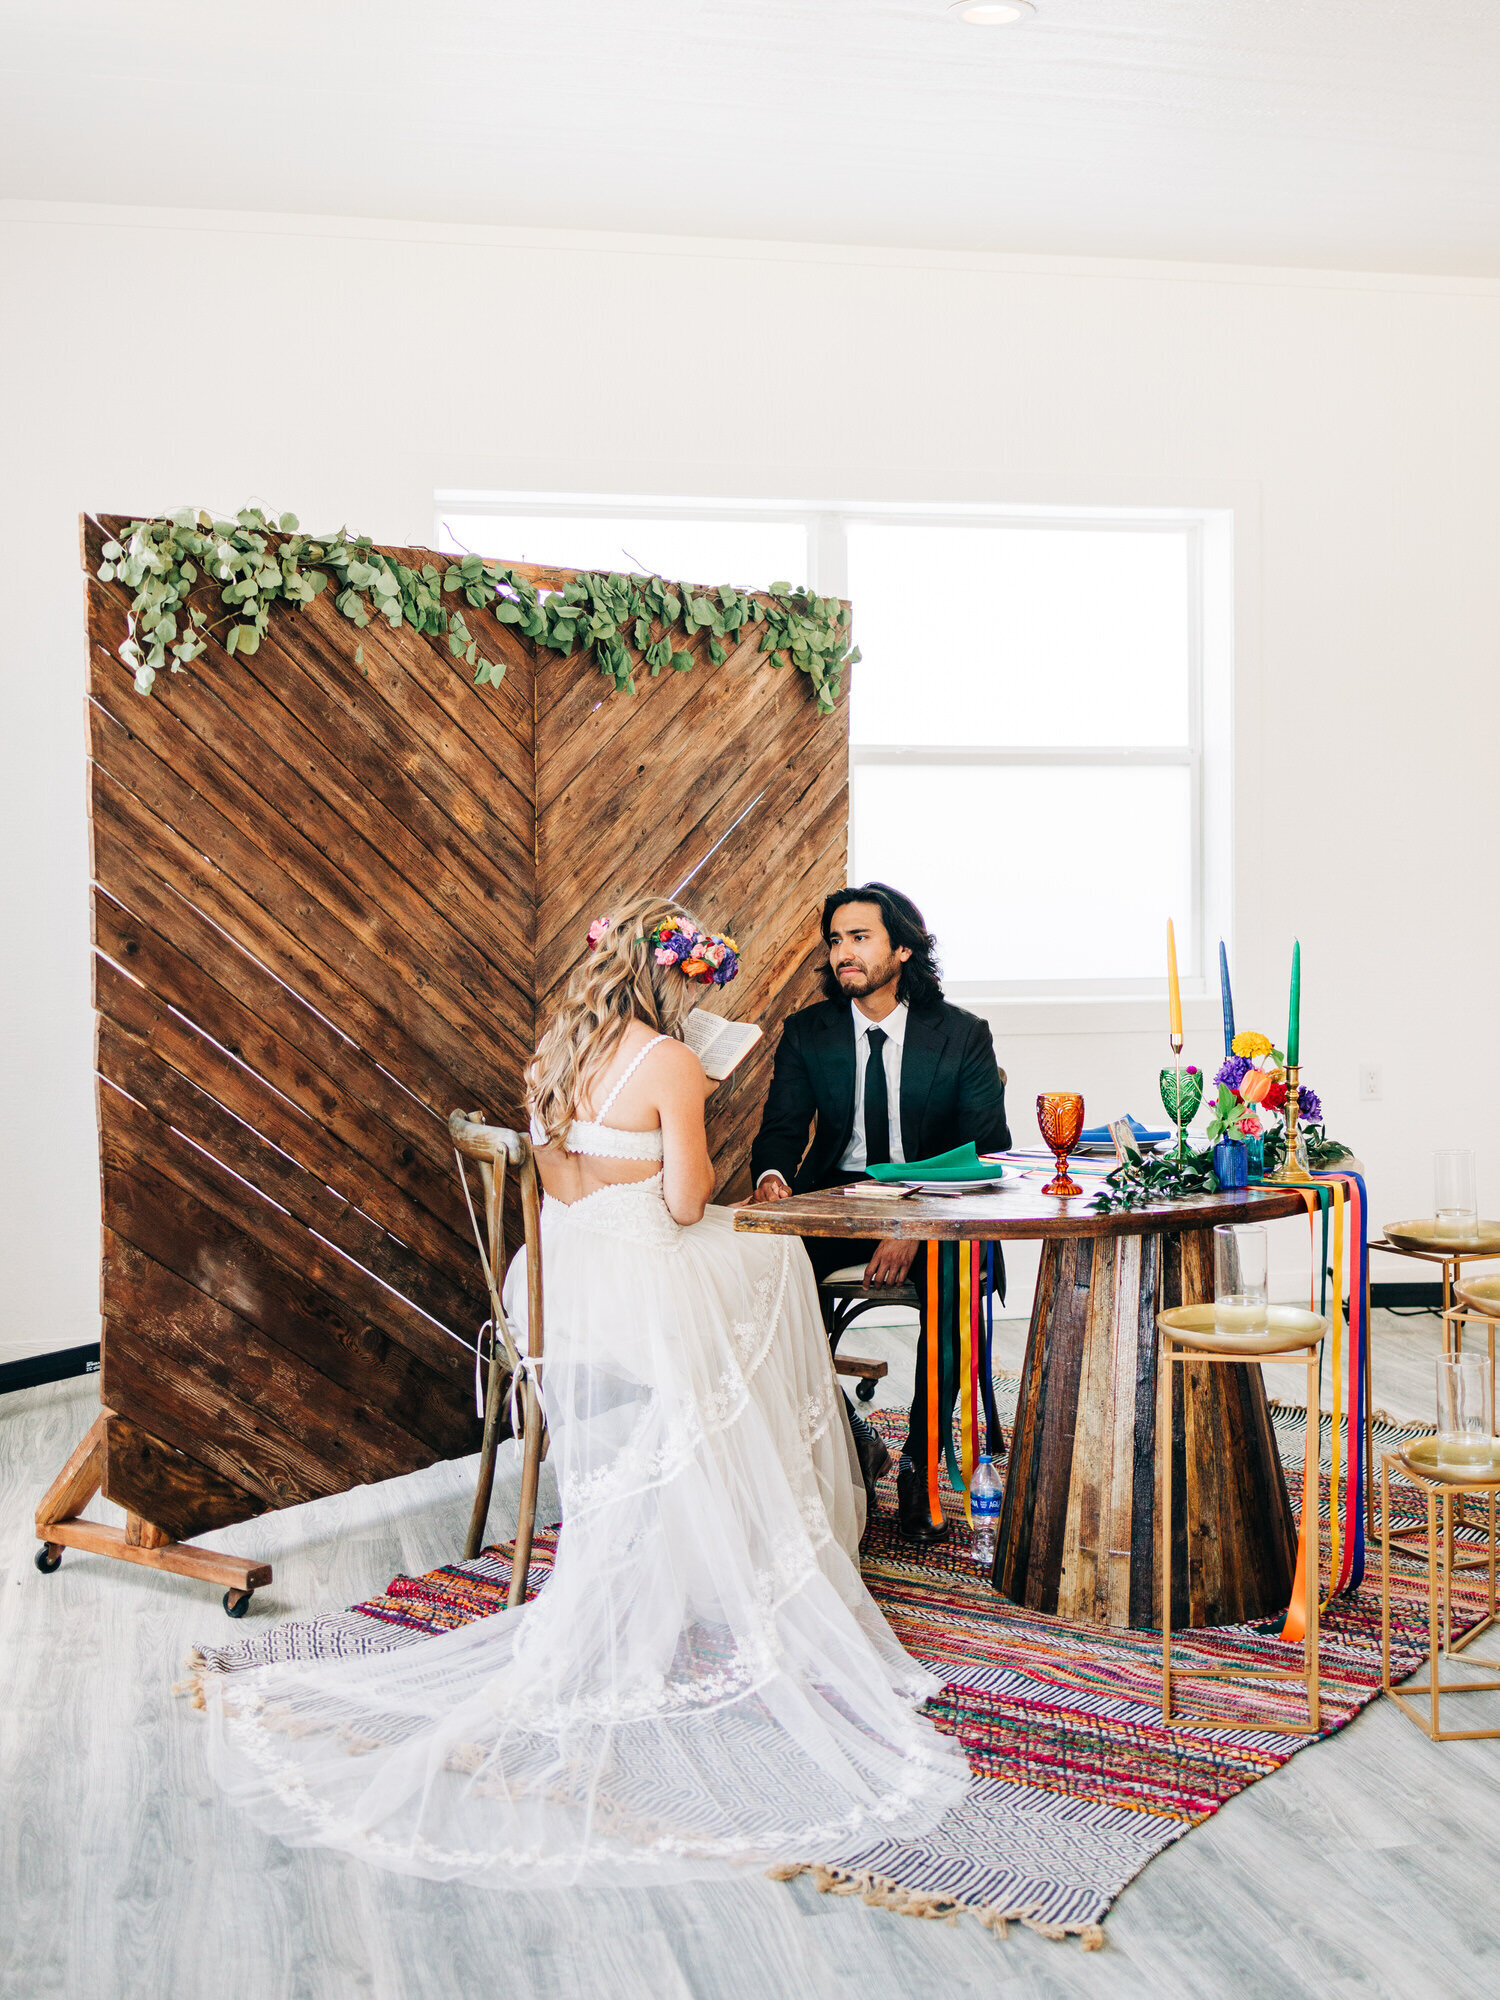 A bride and a groom sit at their sweetheart table in an all-white reception venue. The table is decorated with colorful candles and ribbons. The bride is wearing a flower crown and a boho wedding dress. The bride and groom are reading letters to each other before their wedding ceremony. This image was taken by a wedding photographer in Denver, CO.